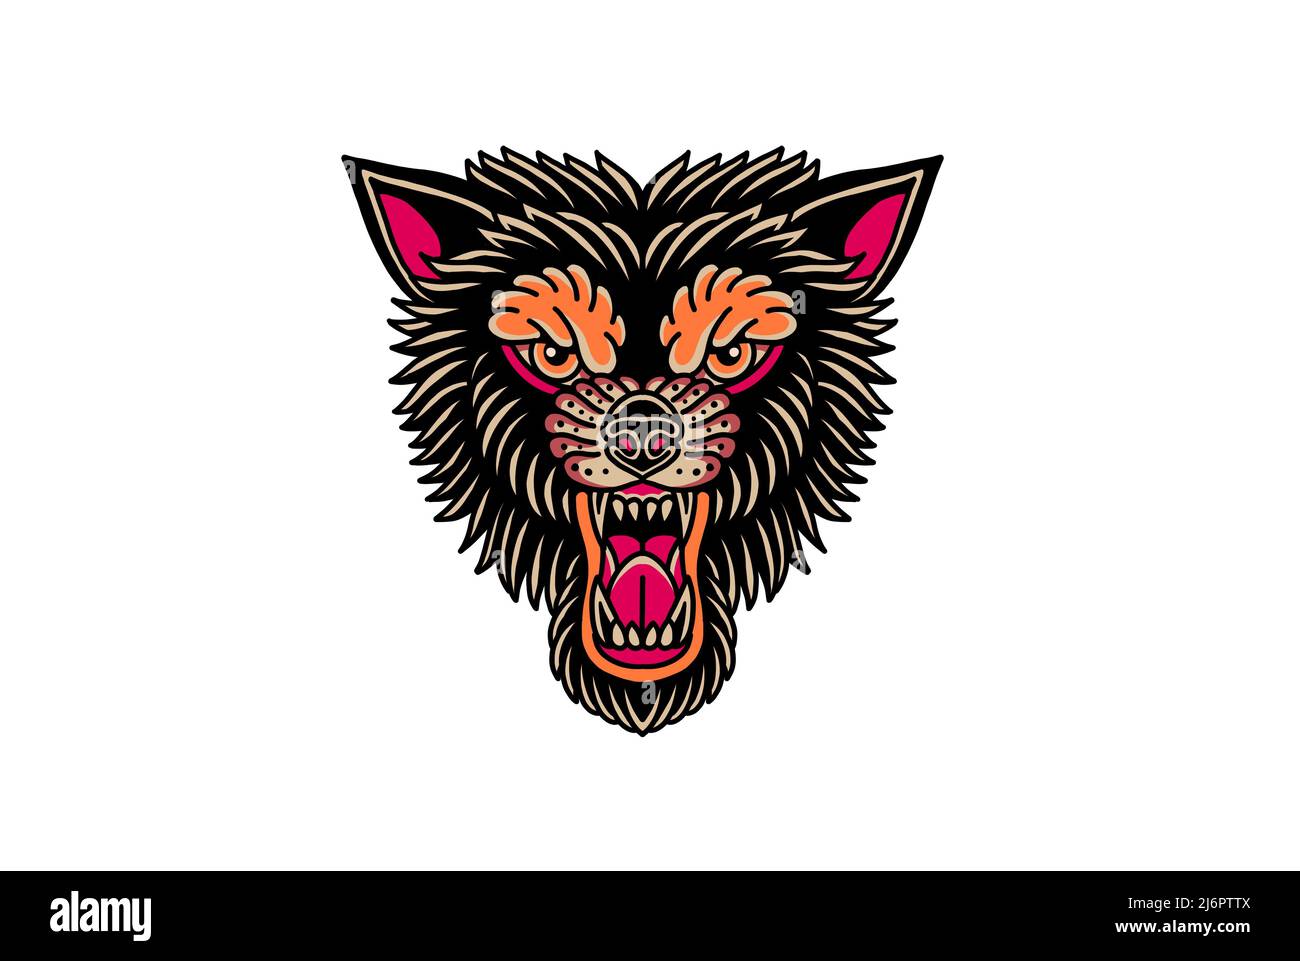 Old school tattoo inspired illustration angry wolf head Stock Photo - Alamy